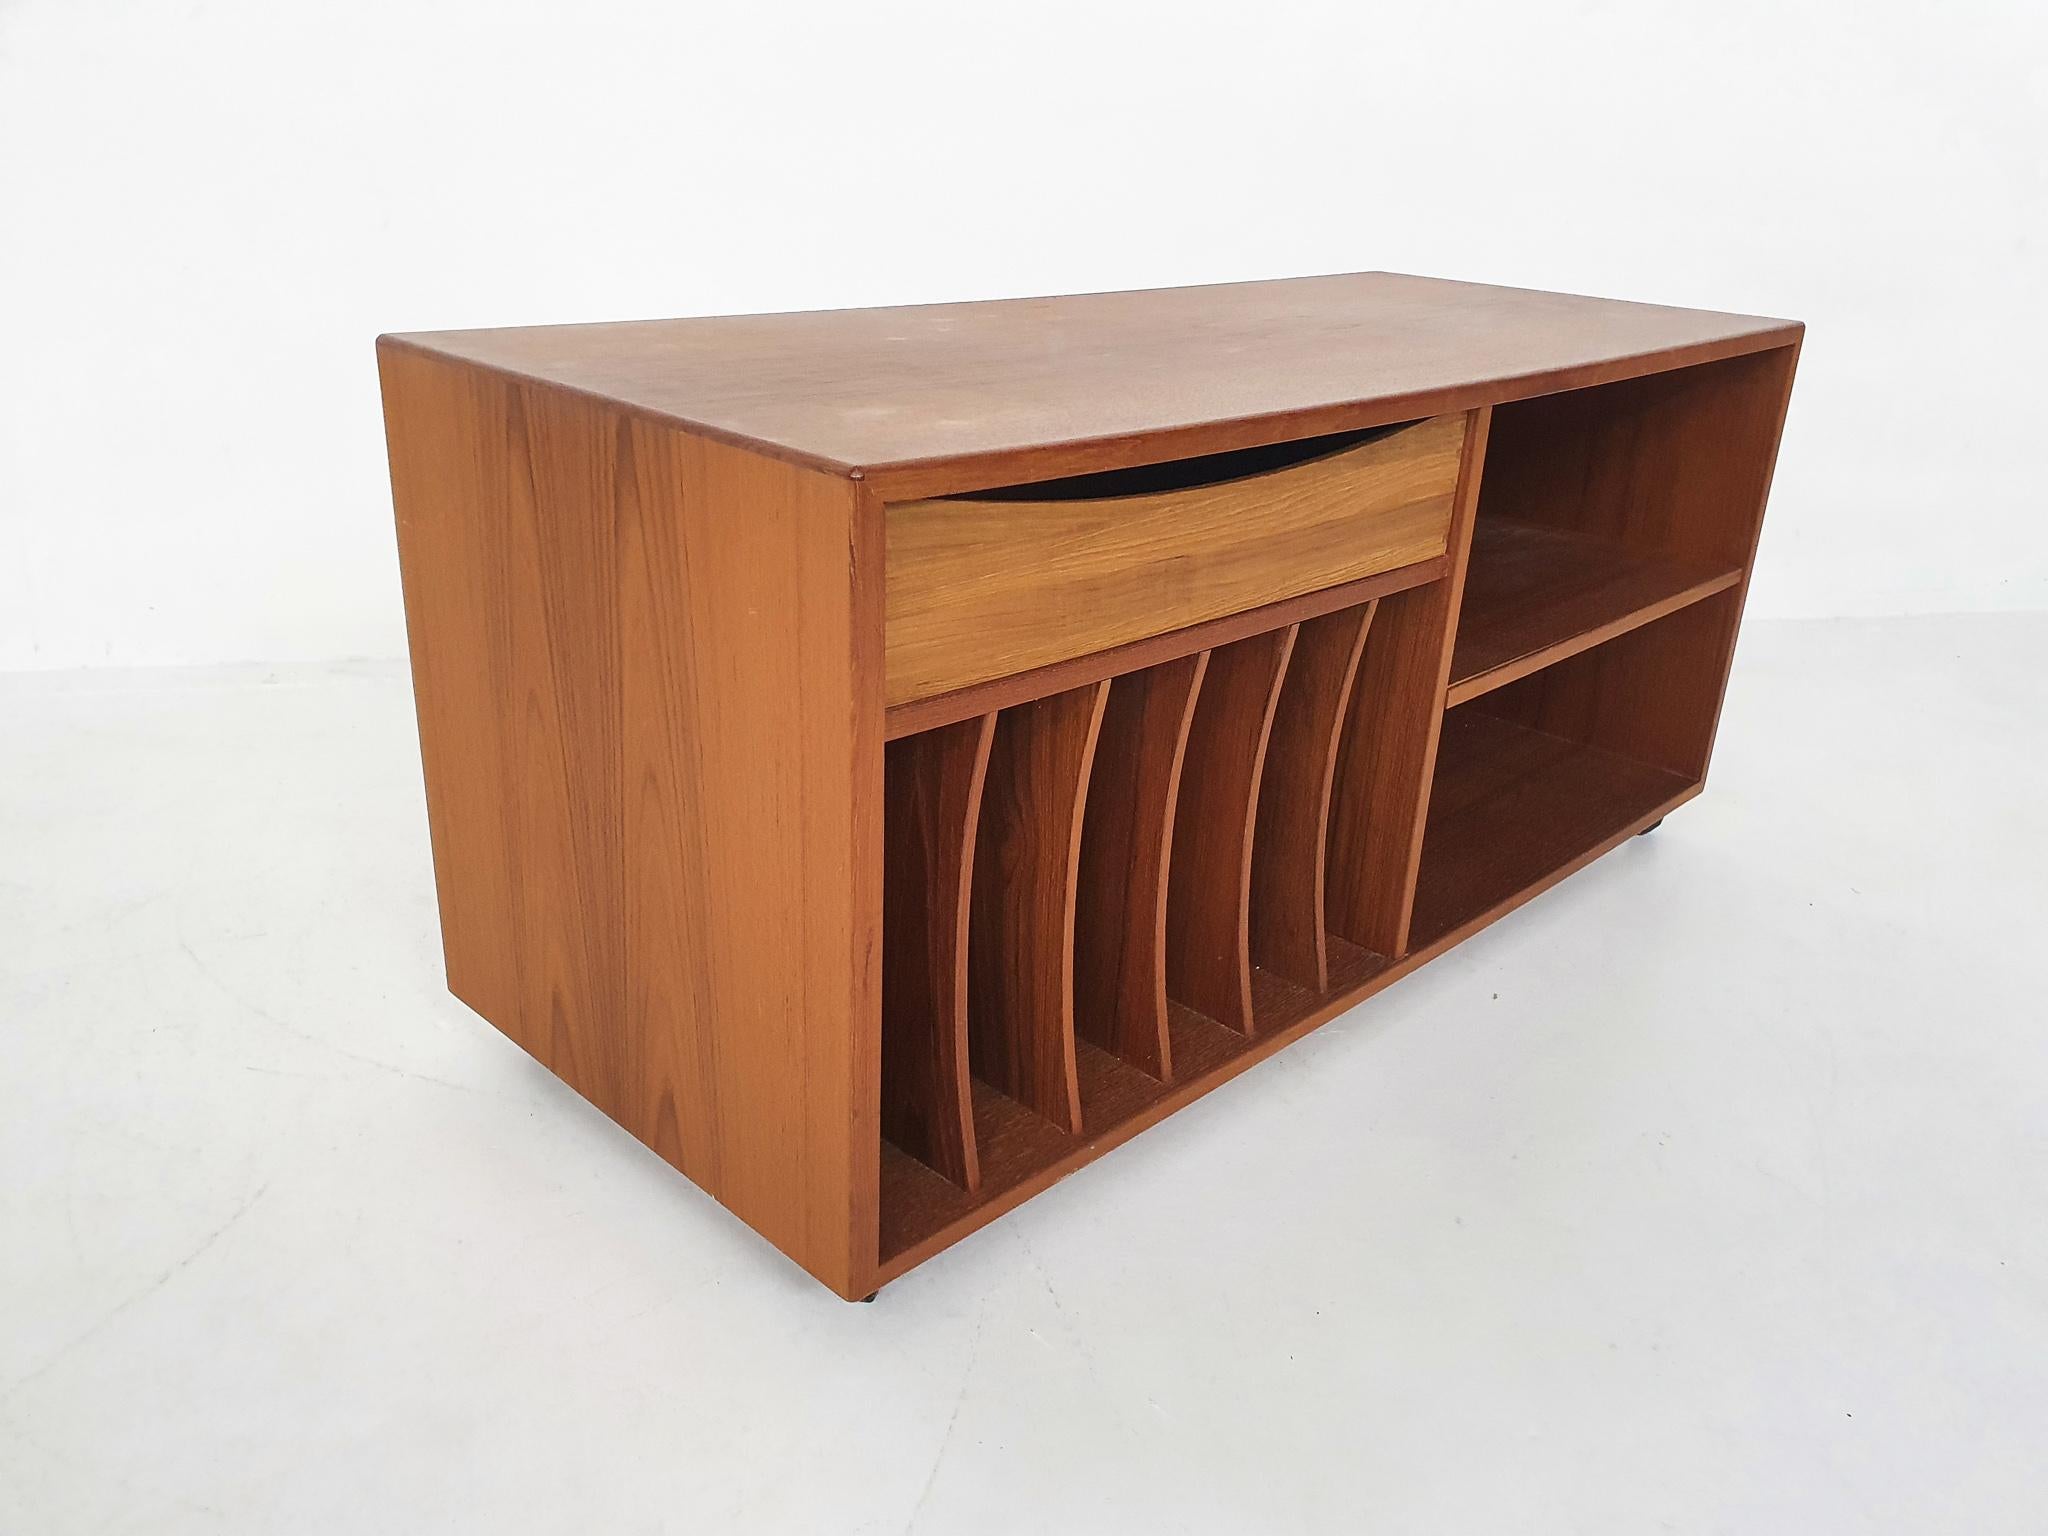 Teak credenza for an audio set. This is quite a rare item, since high end furniture for audio devices were not the most made and bought items in the mid-century.

This item is an unique change to own a beautiful designed Danish piece of furniture